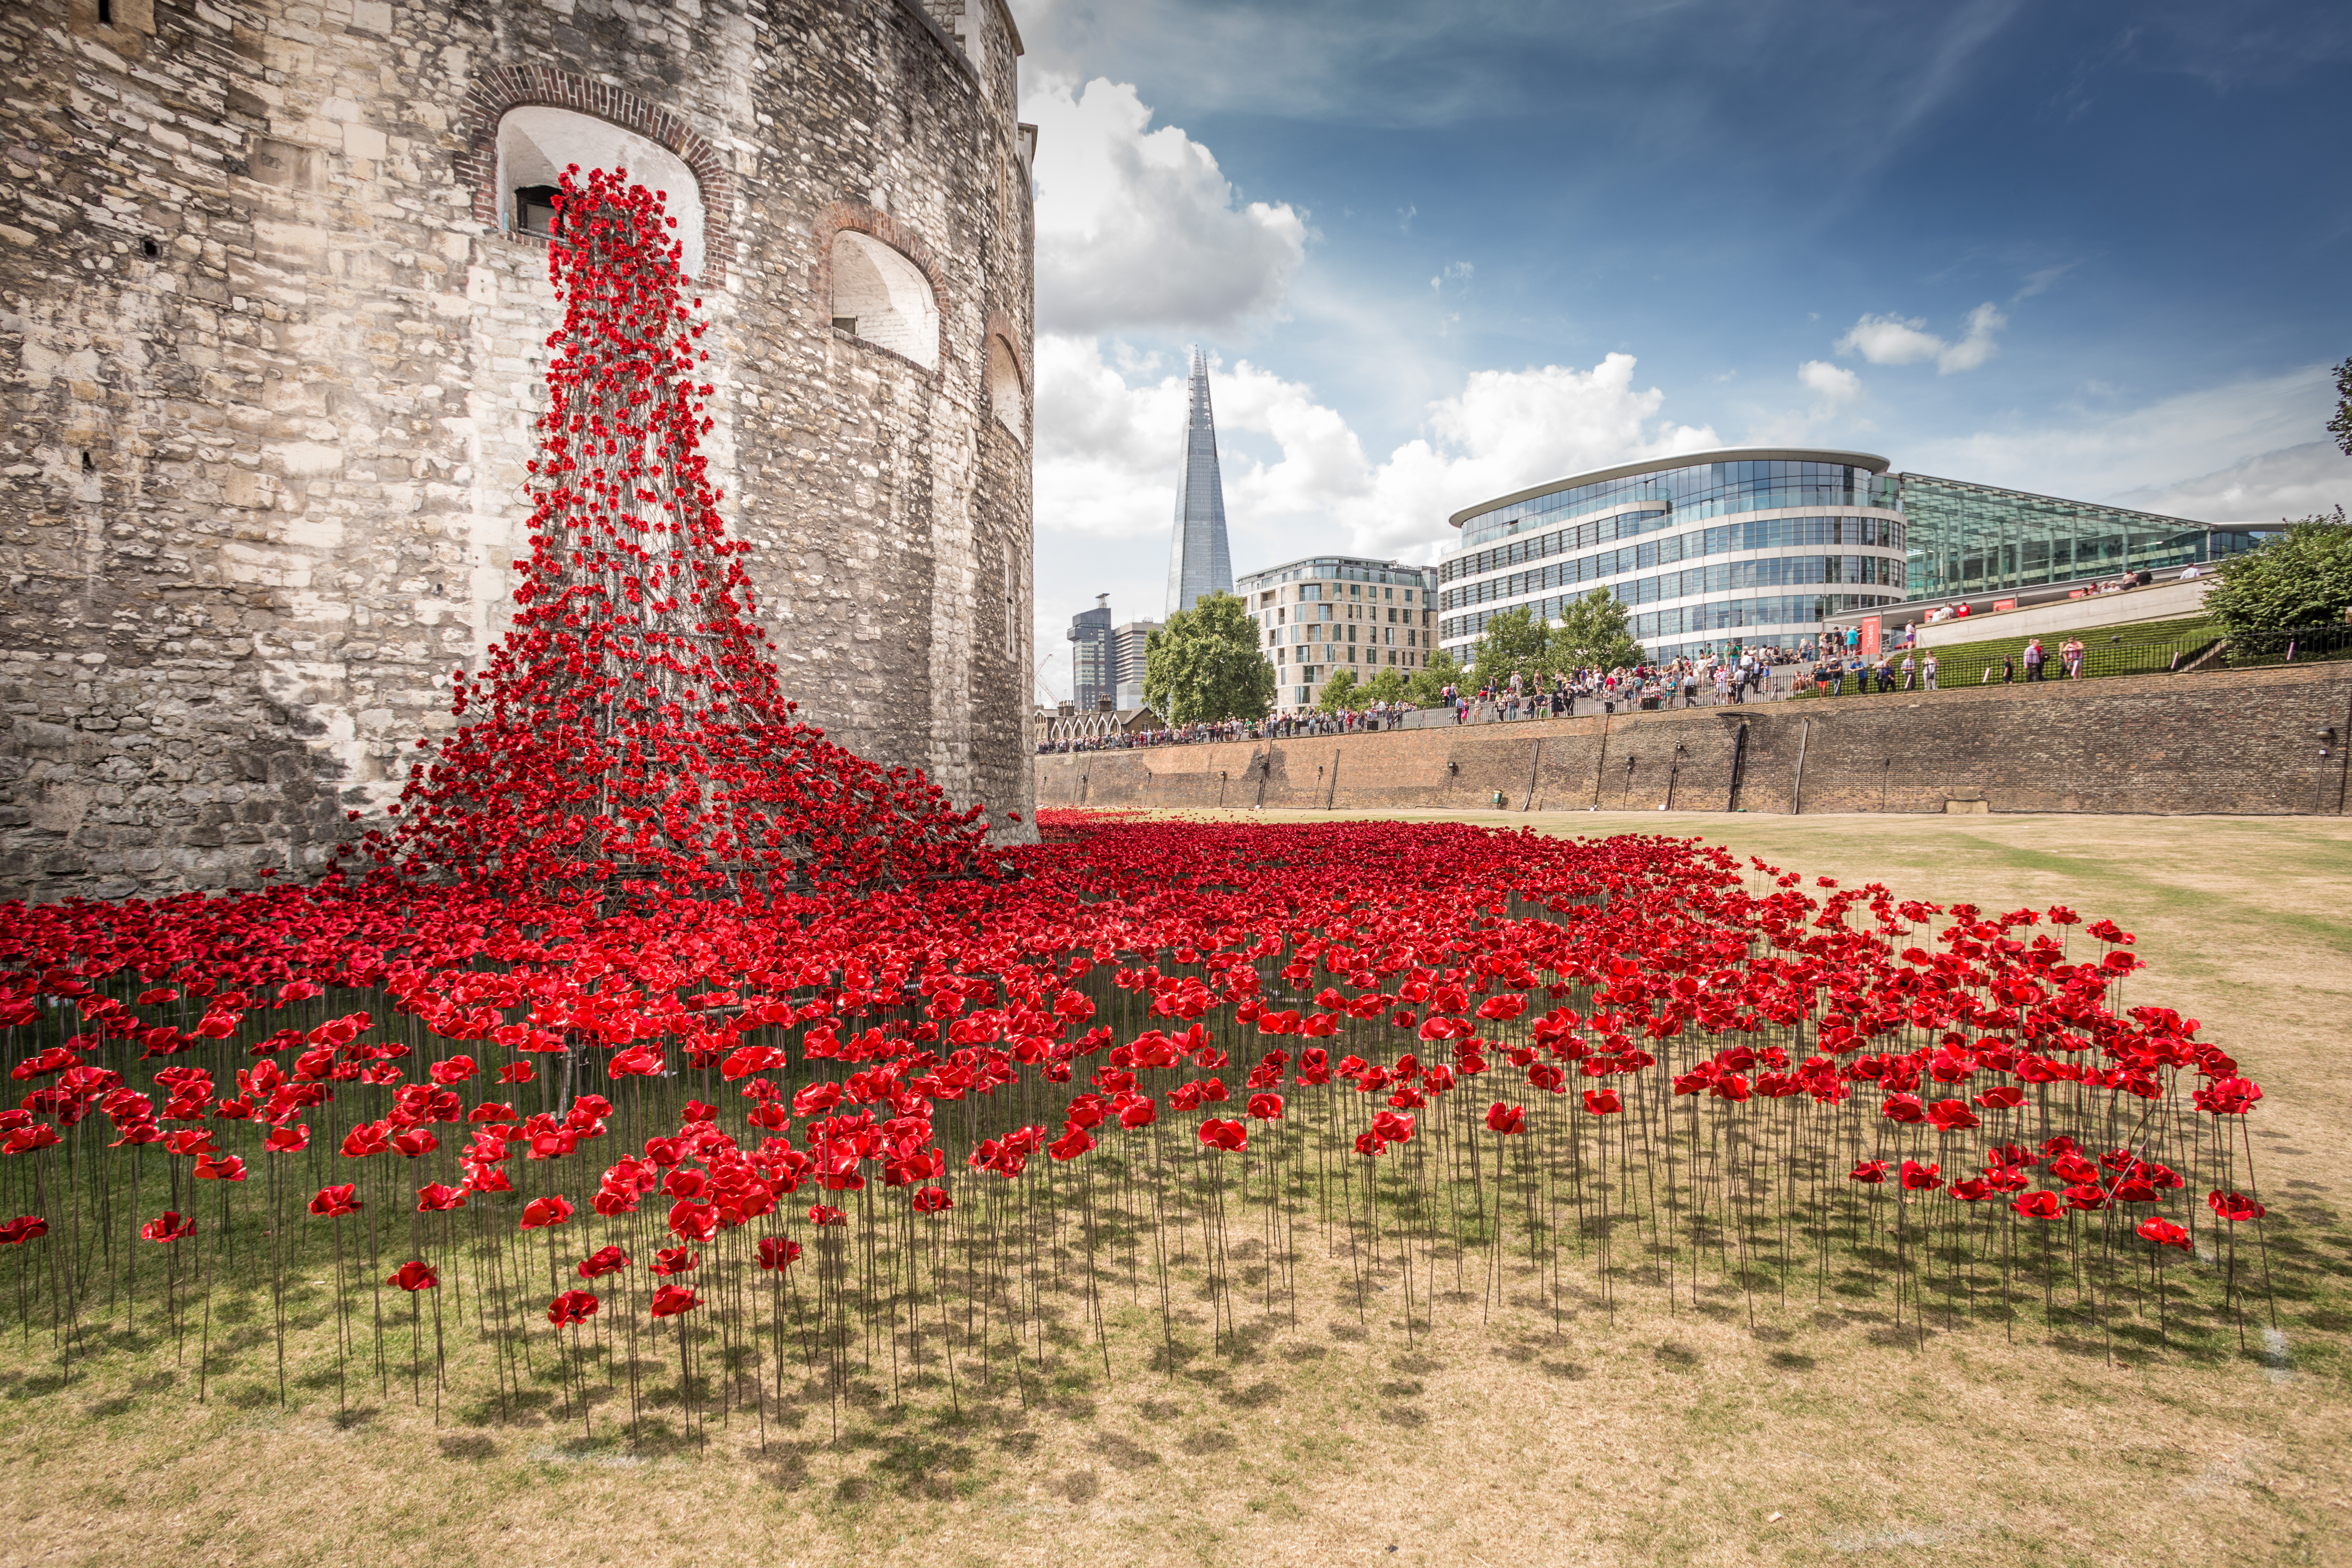 Photograph of installation by Paul Cummings and Tom Piper at the Tower of London in 2014. Thousands of red ceramic poppies adorn the  towers, sweeping across the ground.